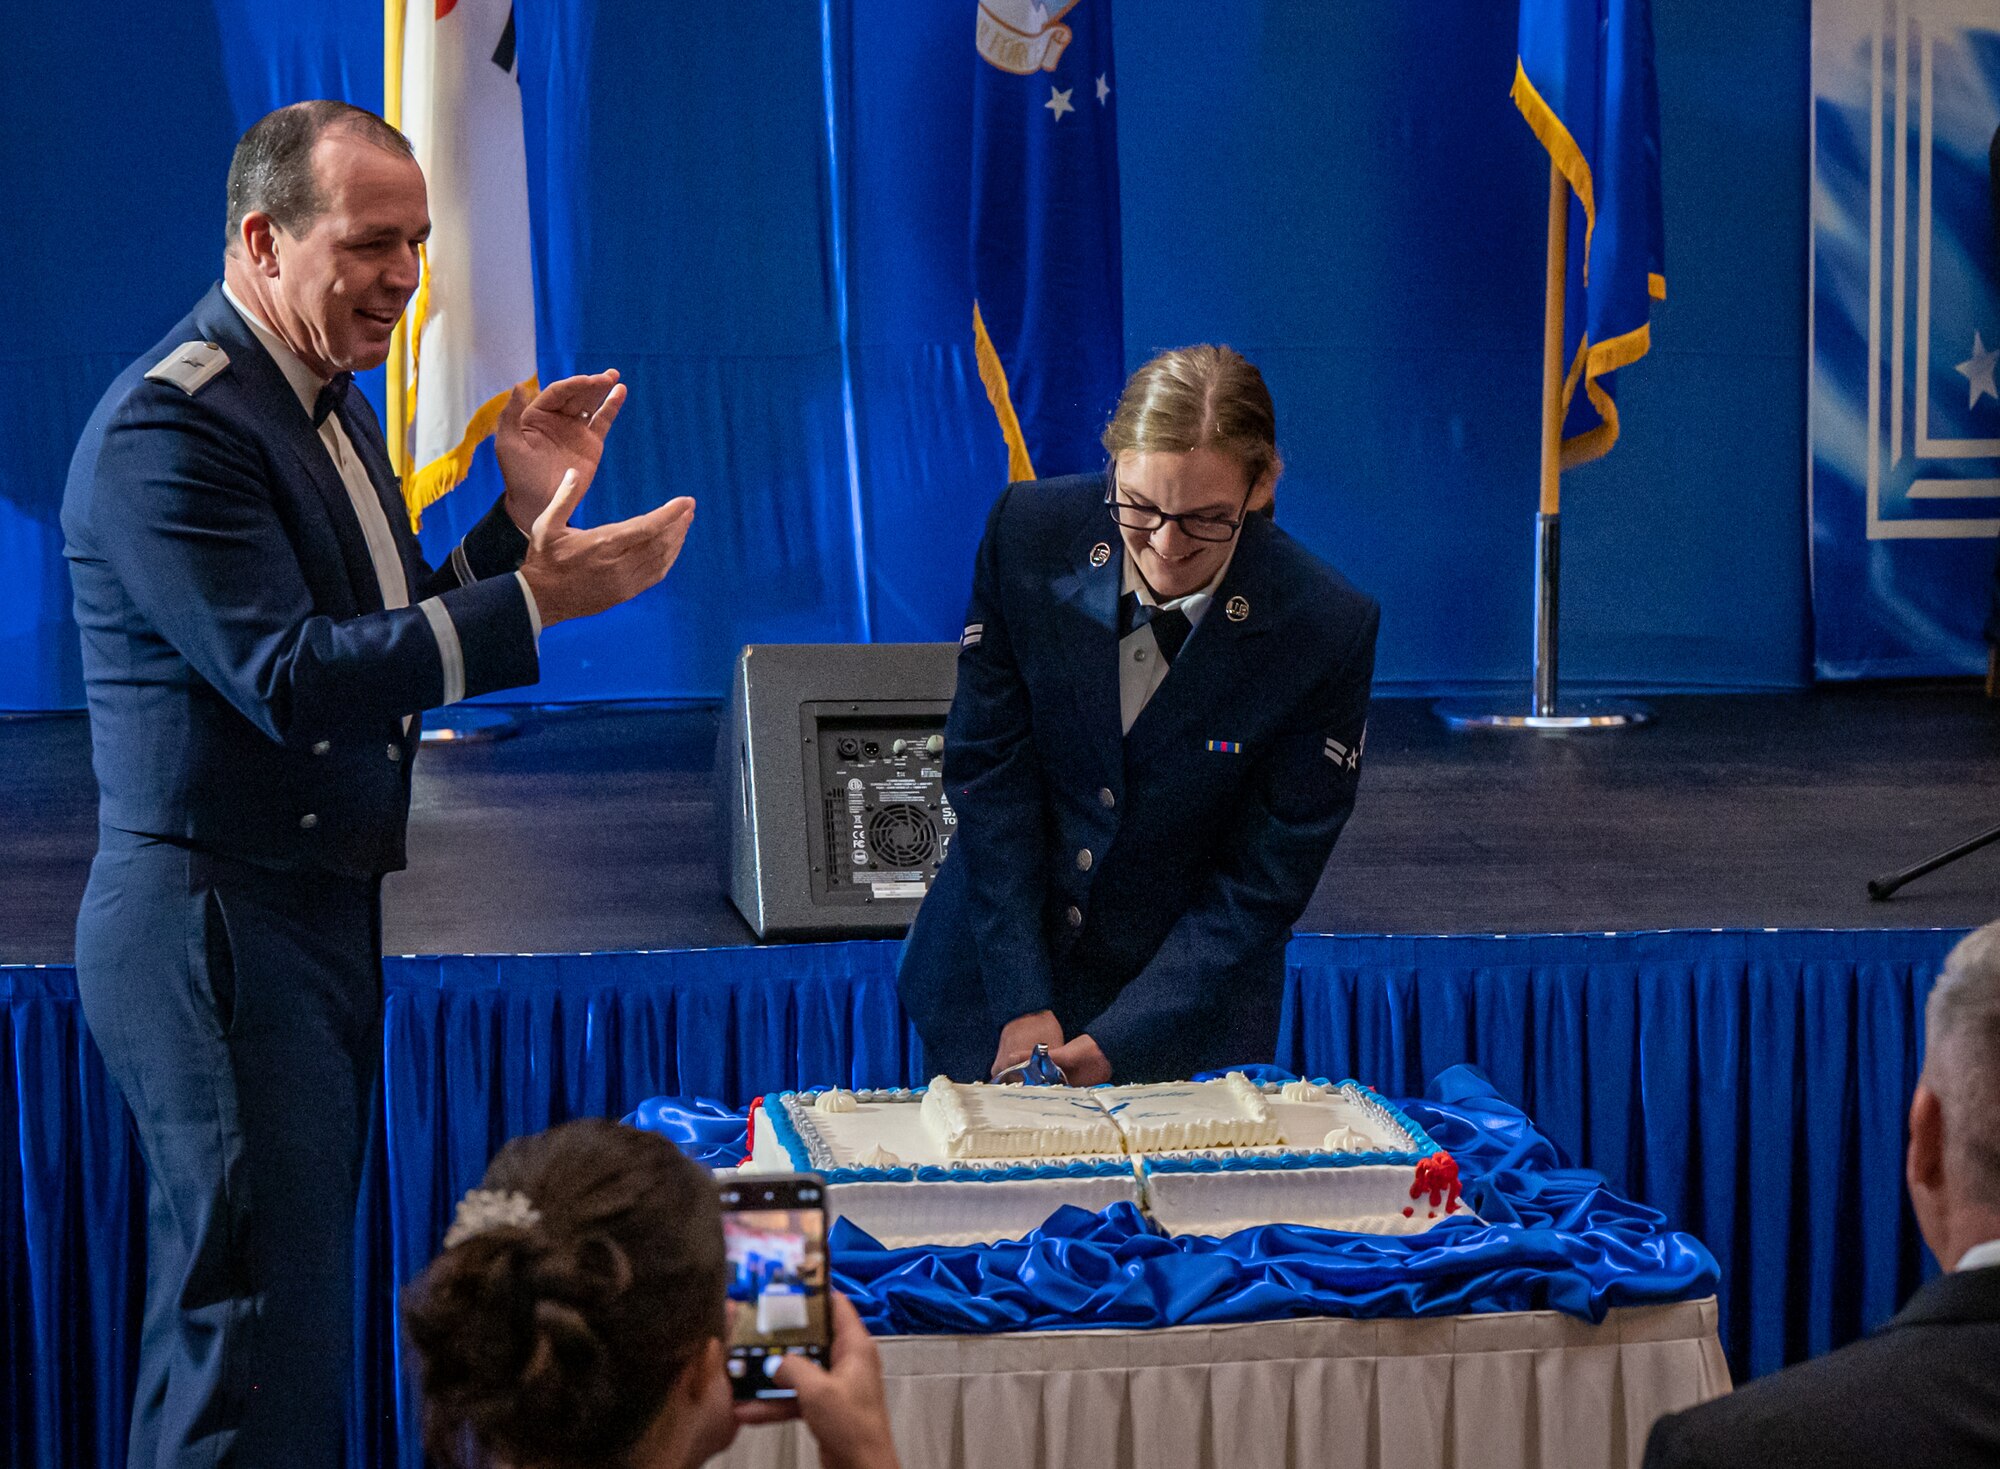 U.S. Air Force Brig. Gen. Steven Gorski, Director of Intelligence United States Forces Korea, observes Airman 1st Class Skye Lavalley, the youngest Airmen in attendance of the Air Force Ball, cut the birthday cake at U.S. Army Garrison Yongsan, Republic of Korea, Sept. 23, 2023. The most senior and junior Airmen traditionally cut the ceremonial cake to symbolize the passing of heritage between generations. (U.S. Air Force photo by Staff Sgt. Kelsea Caballero)